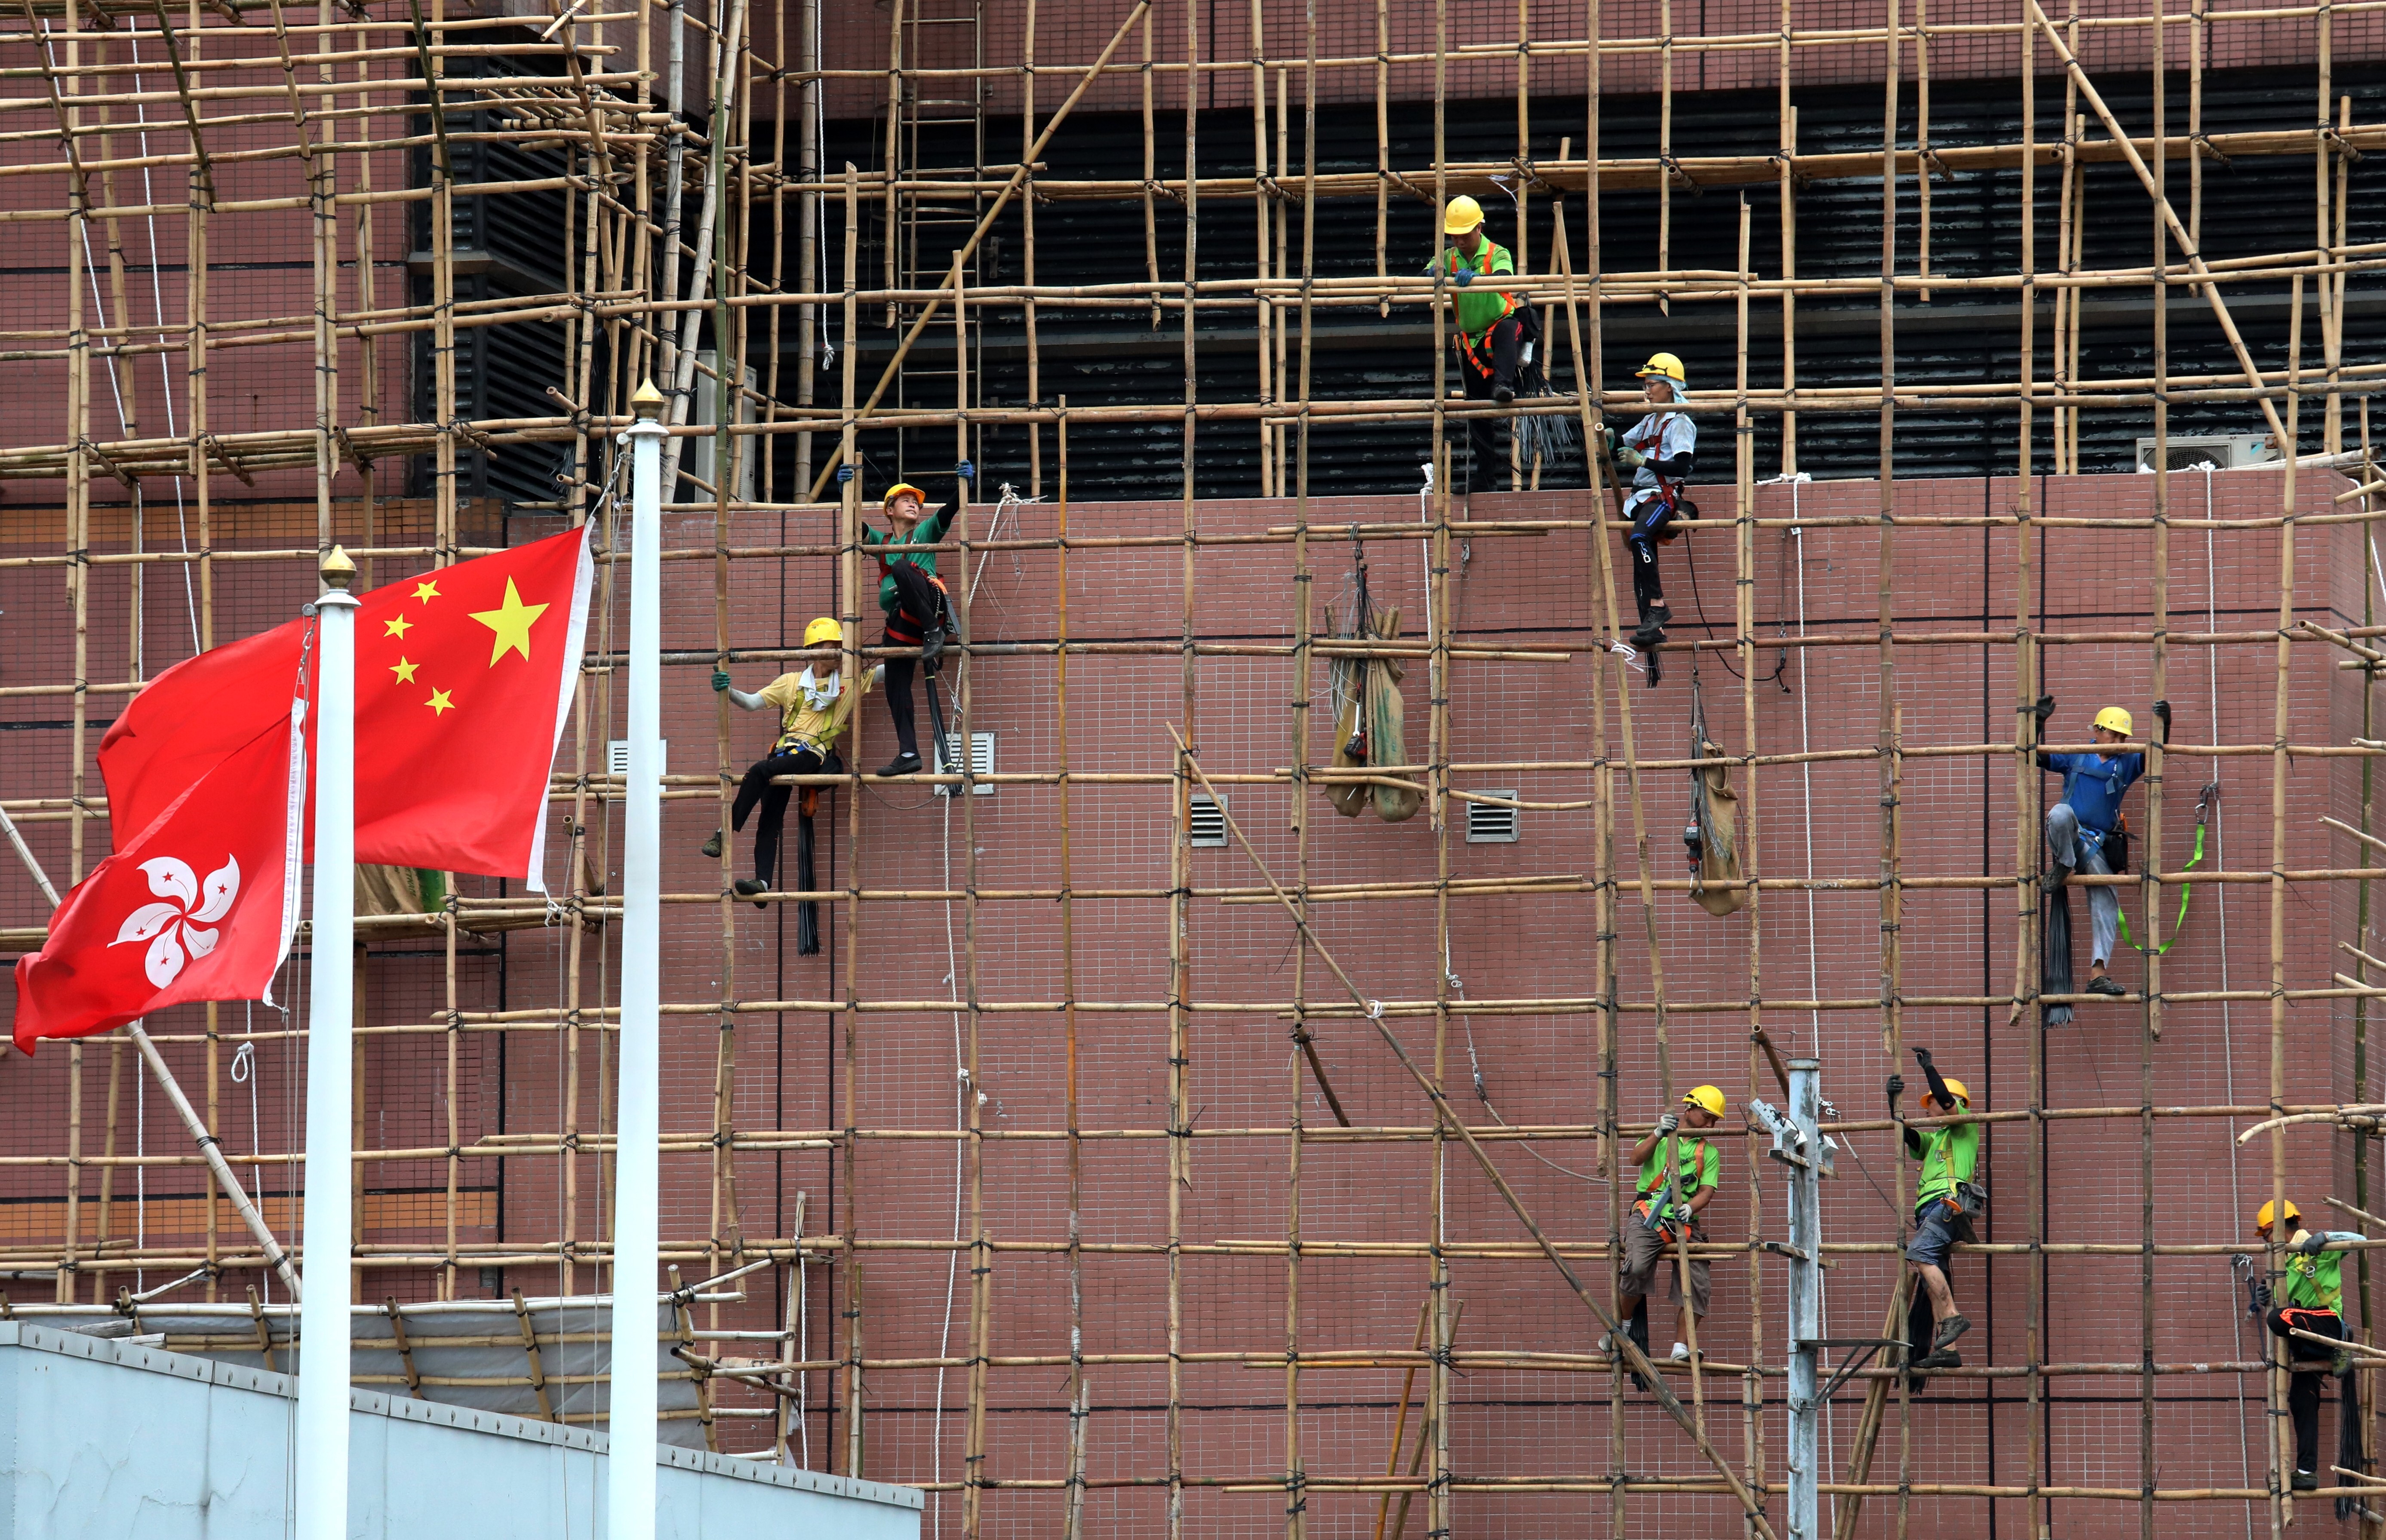 Construction workers remove the scaffolding on a building in Sham Shui Po as the Hong Kong and Chinese flags flutter in the foreground, in June 2019. Photo: Felix Wong